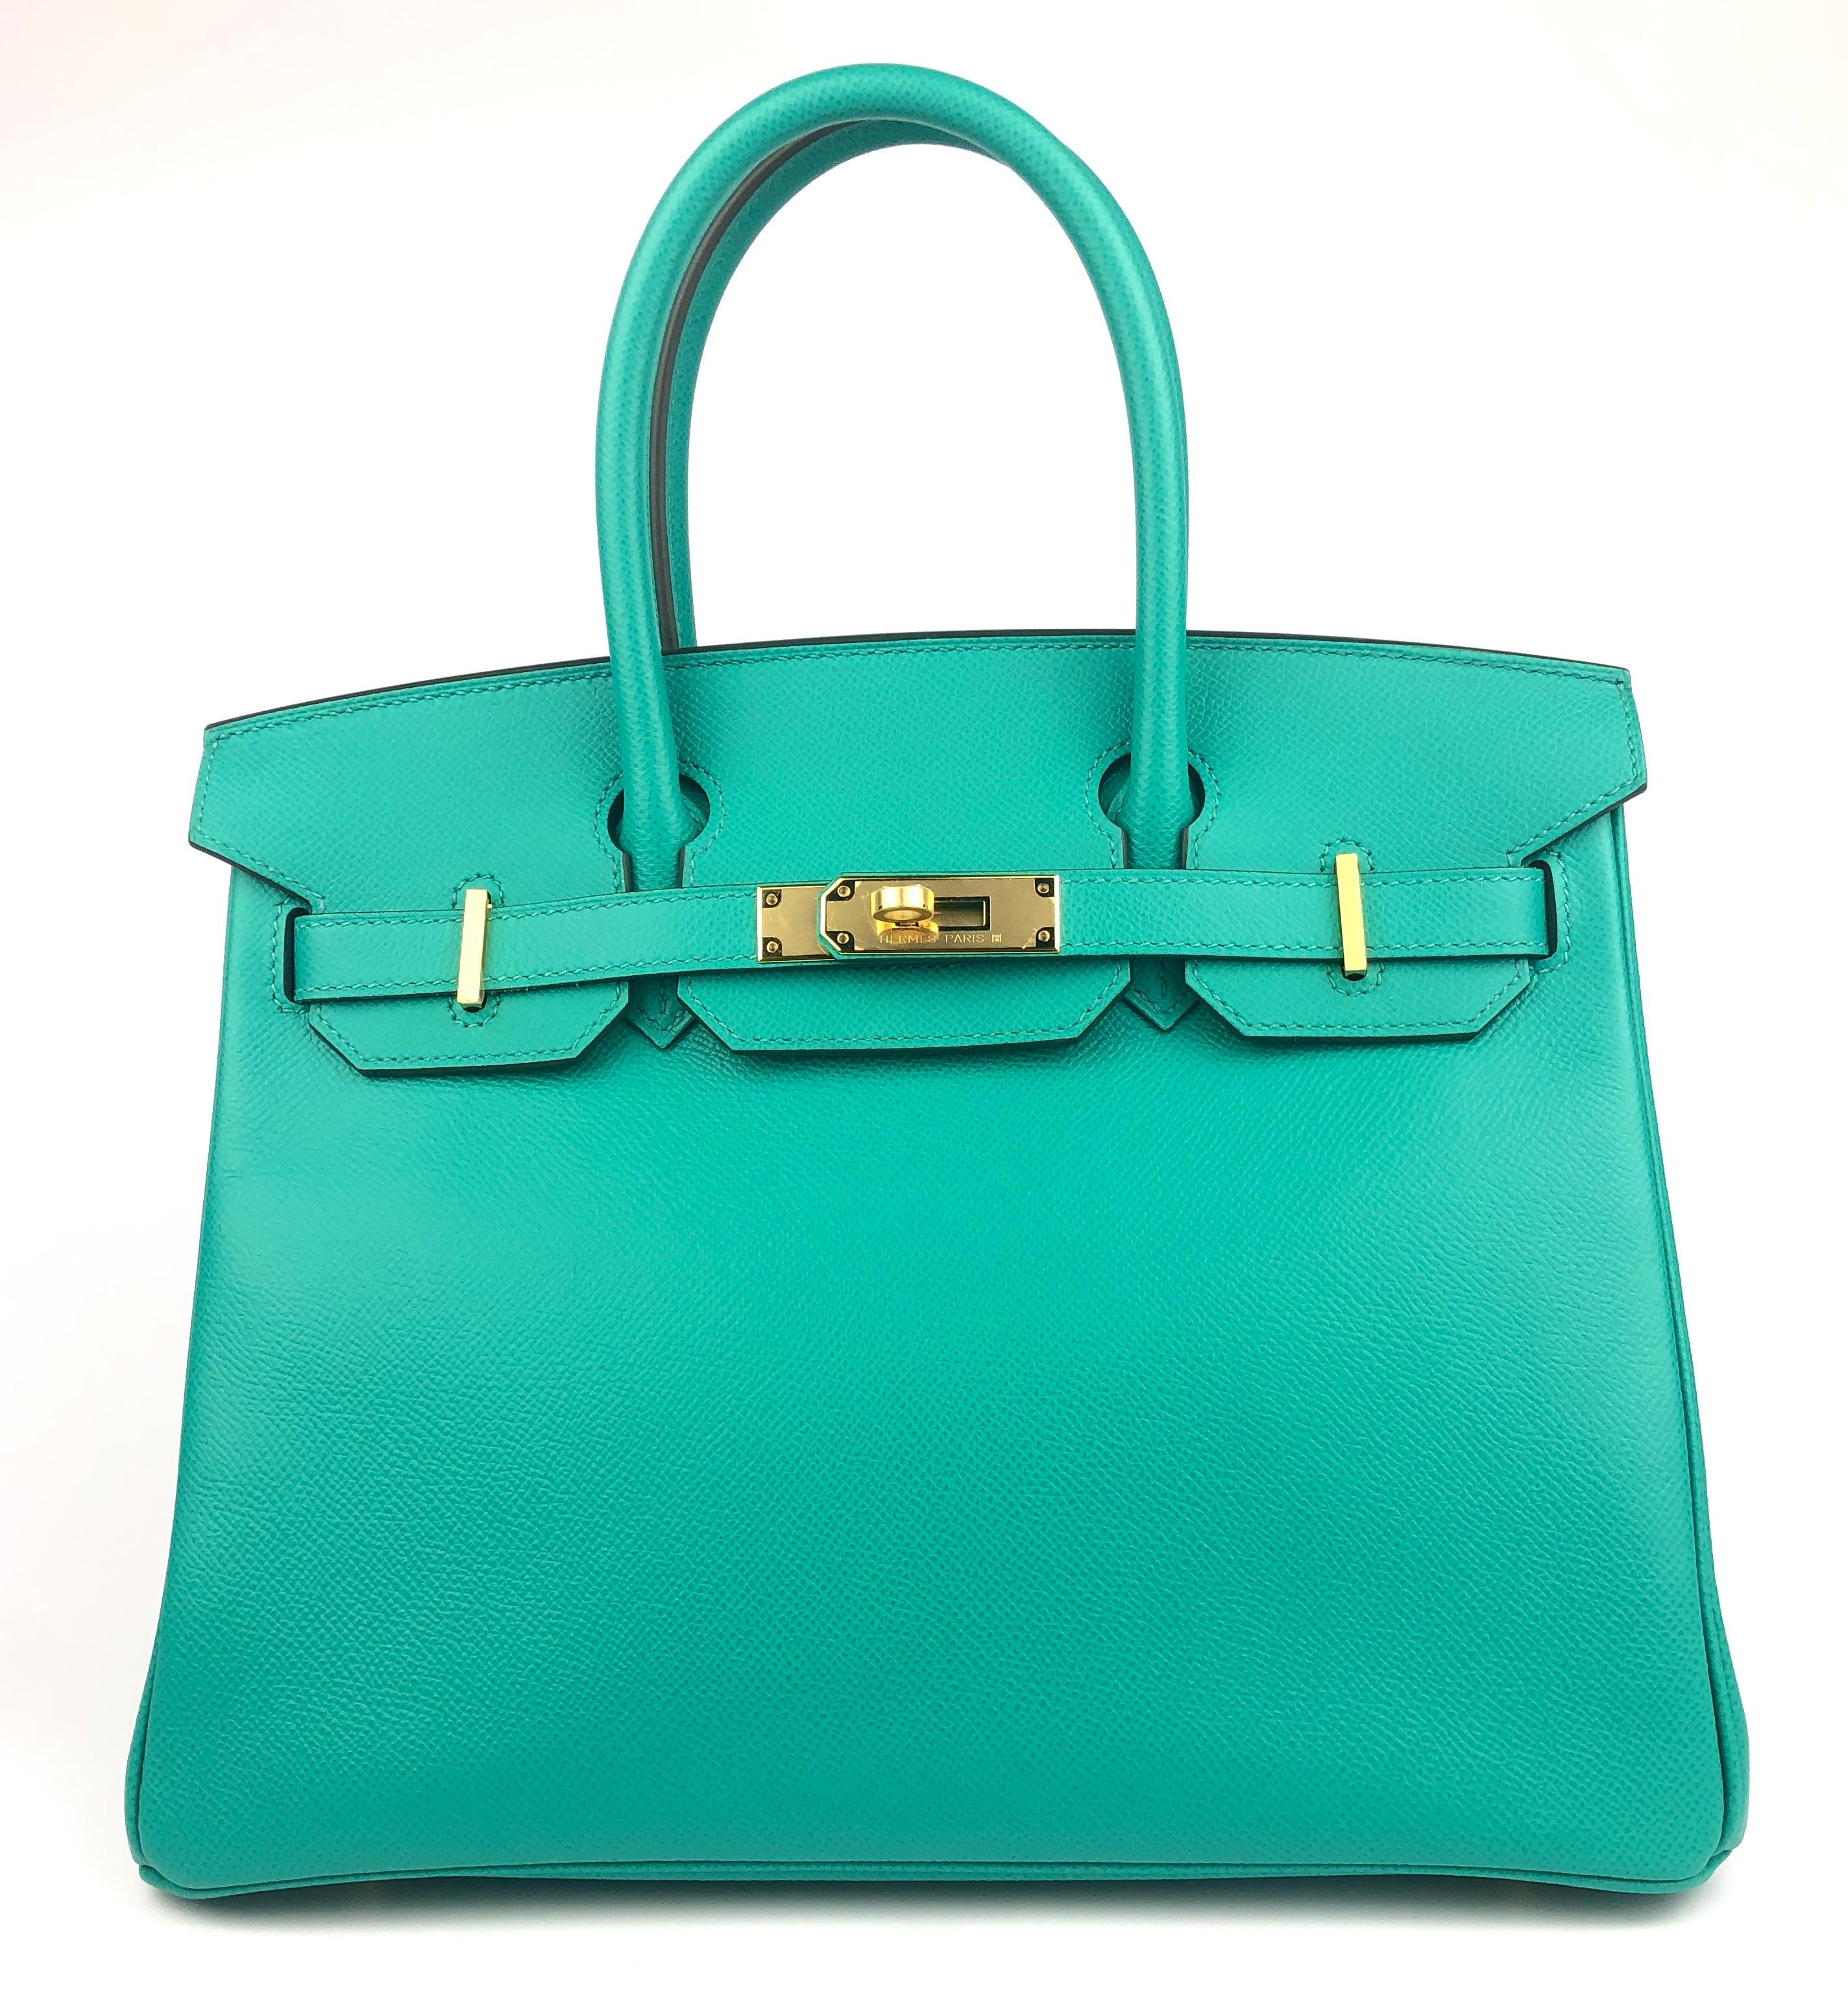 As New Stunning Hermes Birkin 30 Vert Verone Epsom Leather Complimented by Gold Hardware. 
D Stamp 2019. Plastic on all hardware and feet. 

Shop with Confidence from Lux Addicts. Authenticity Guaranteed! 
